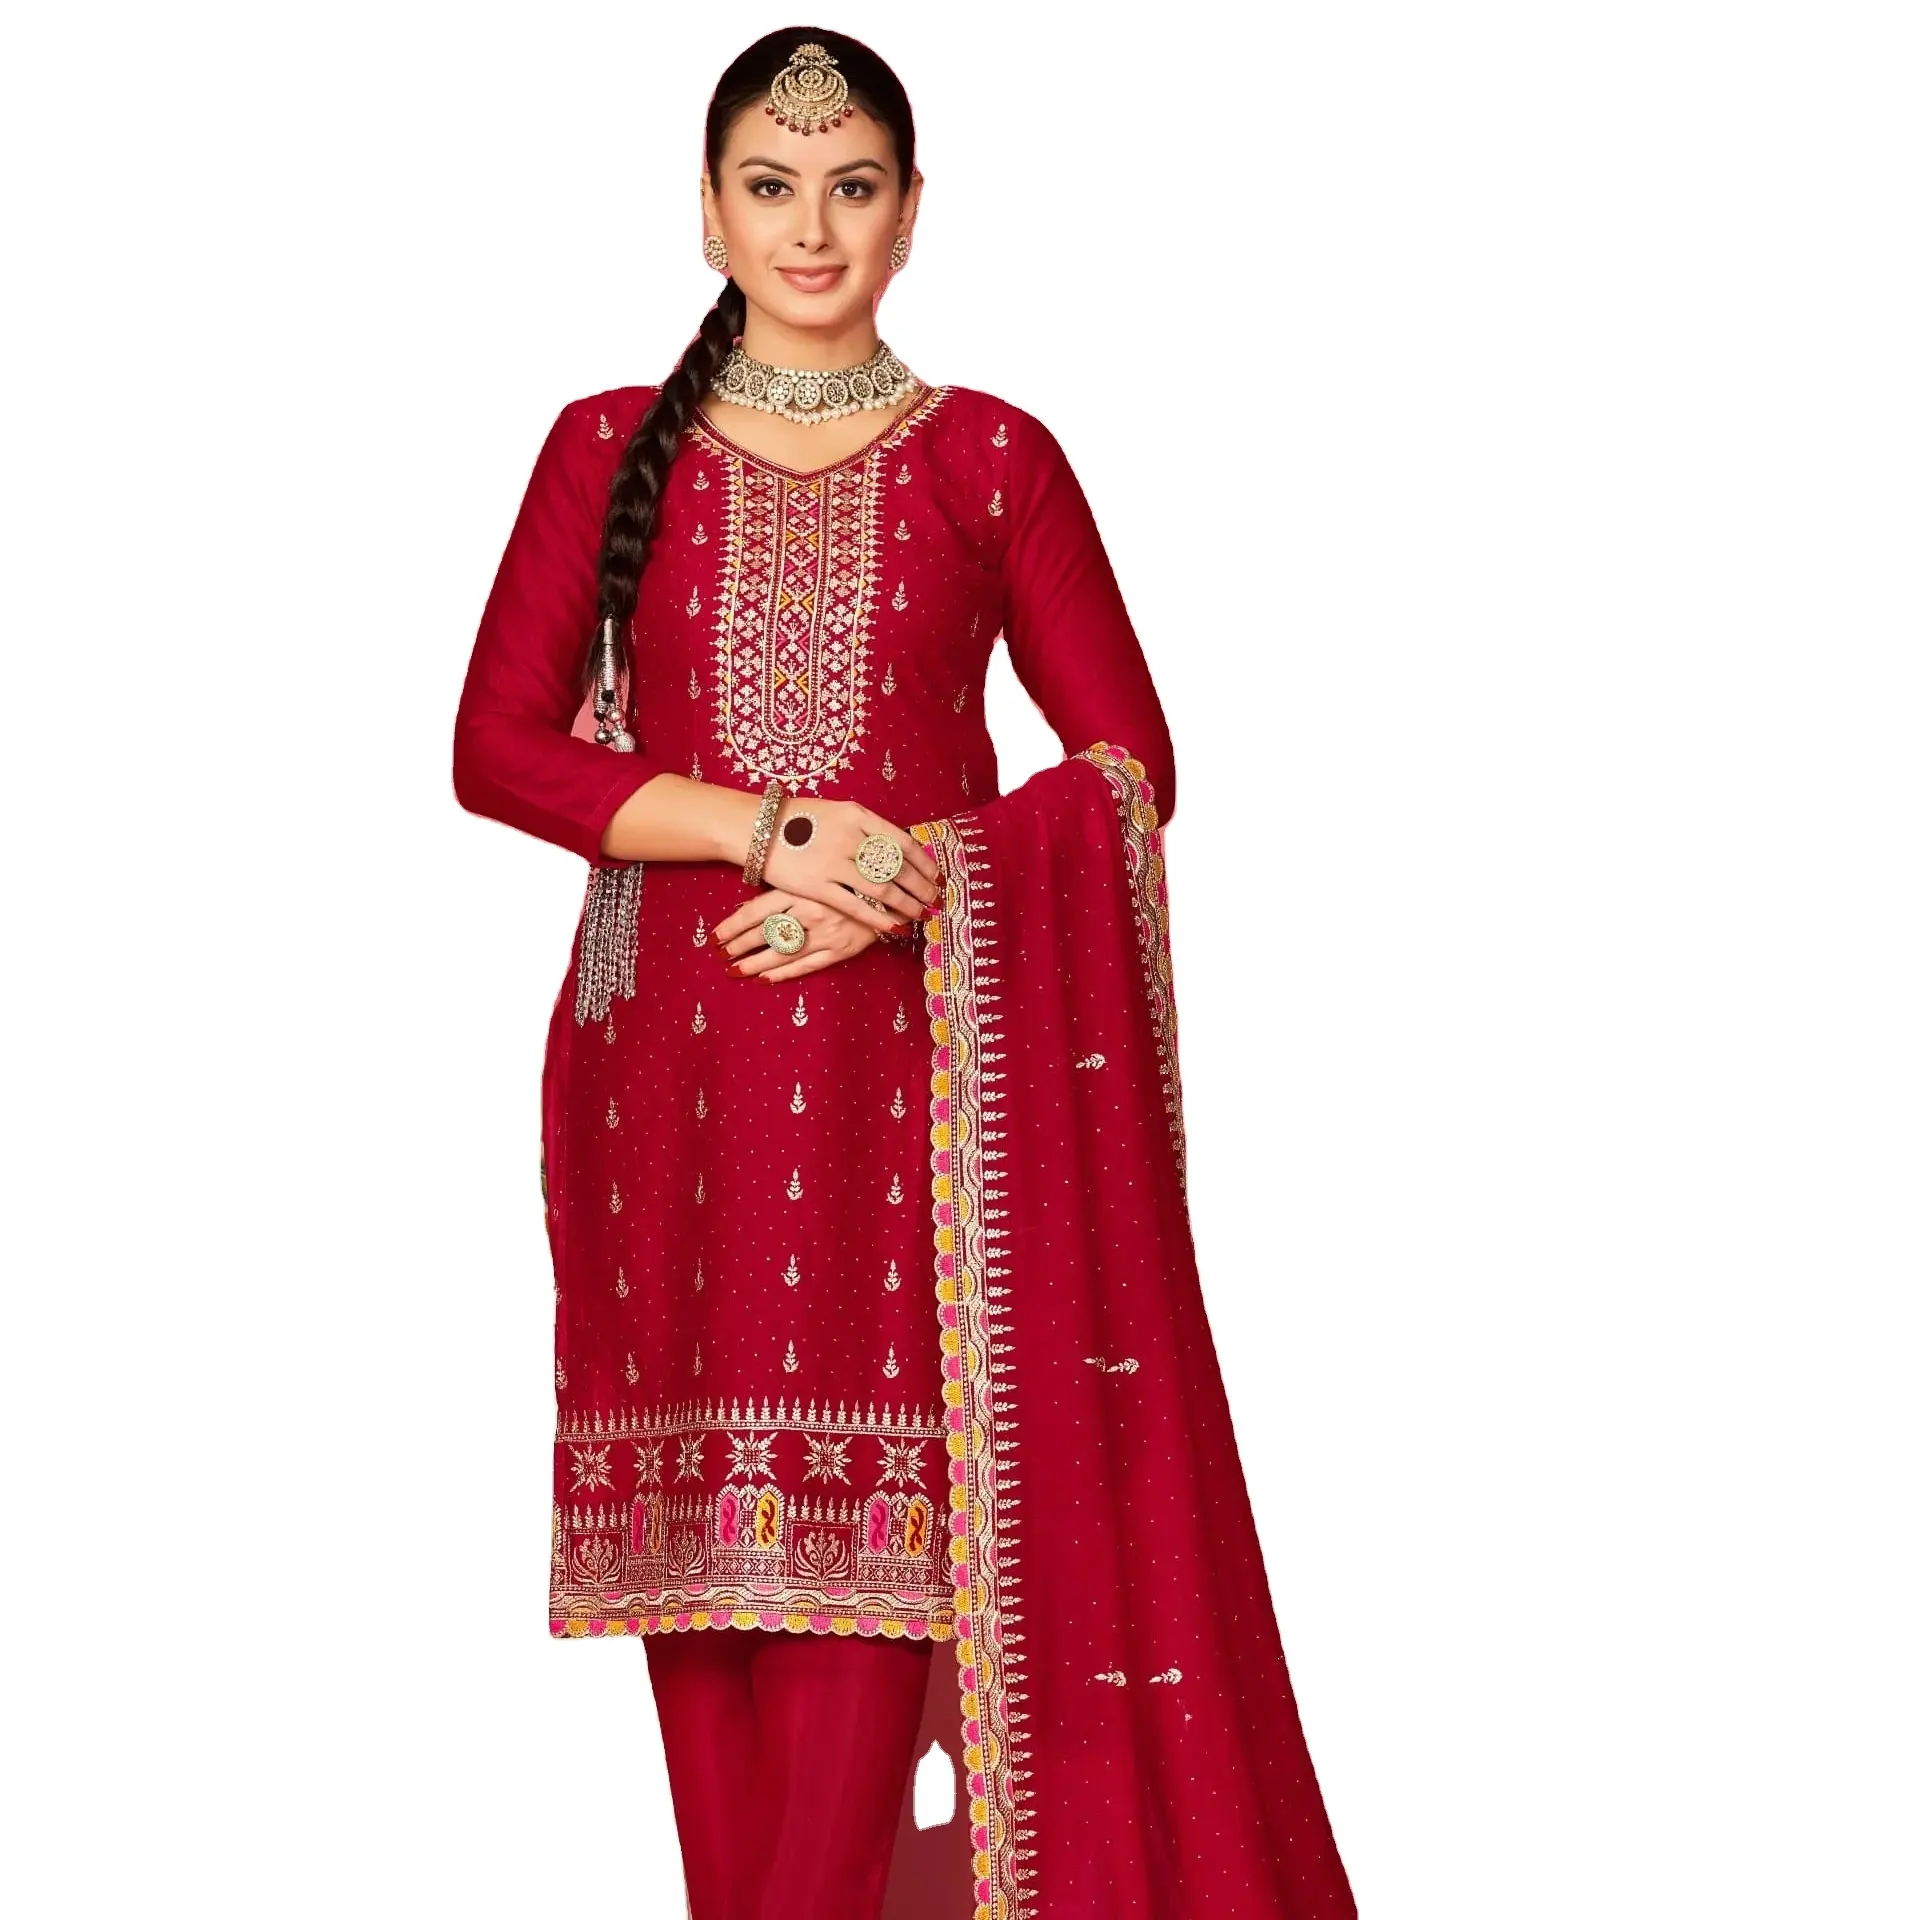 New Pakistani Blooming vichitra with embroidery Work with servoswaki diamond suit with dupatta for online sale